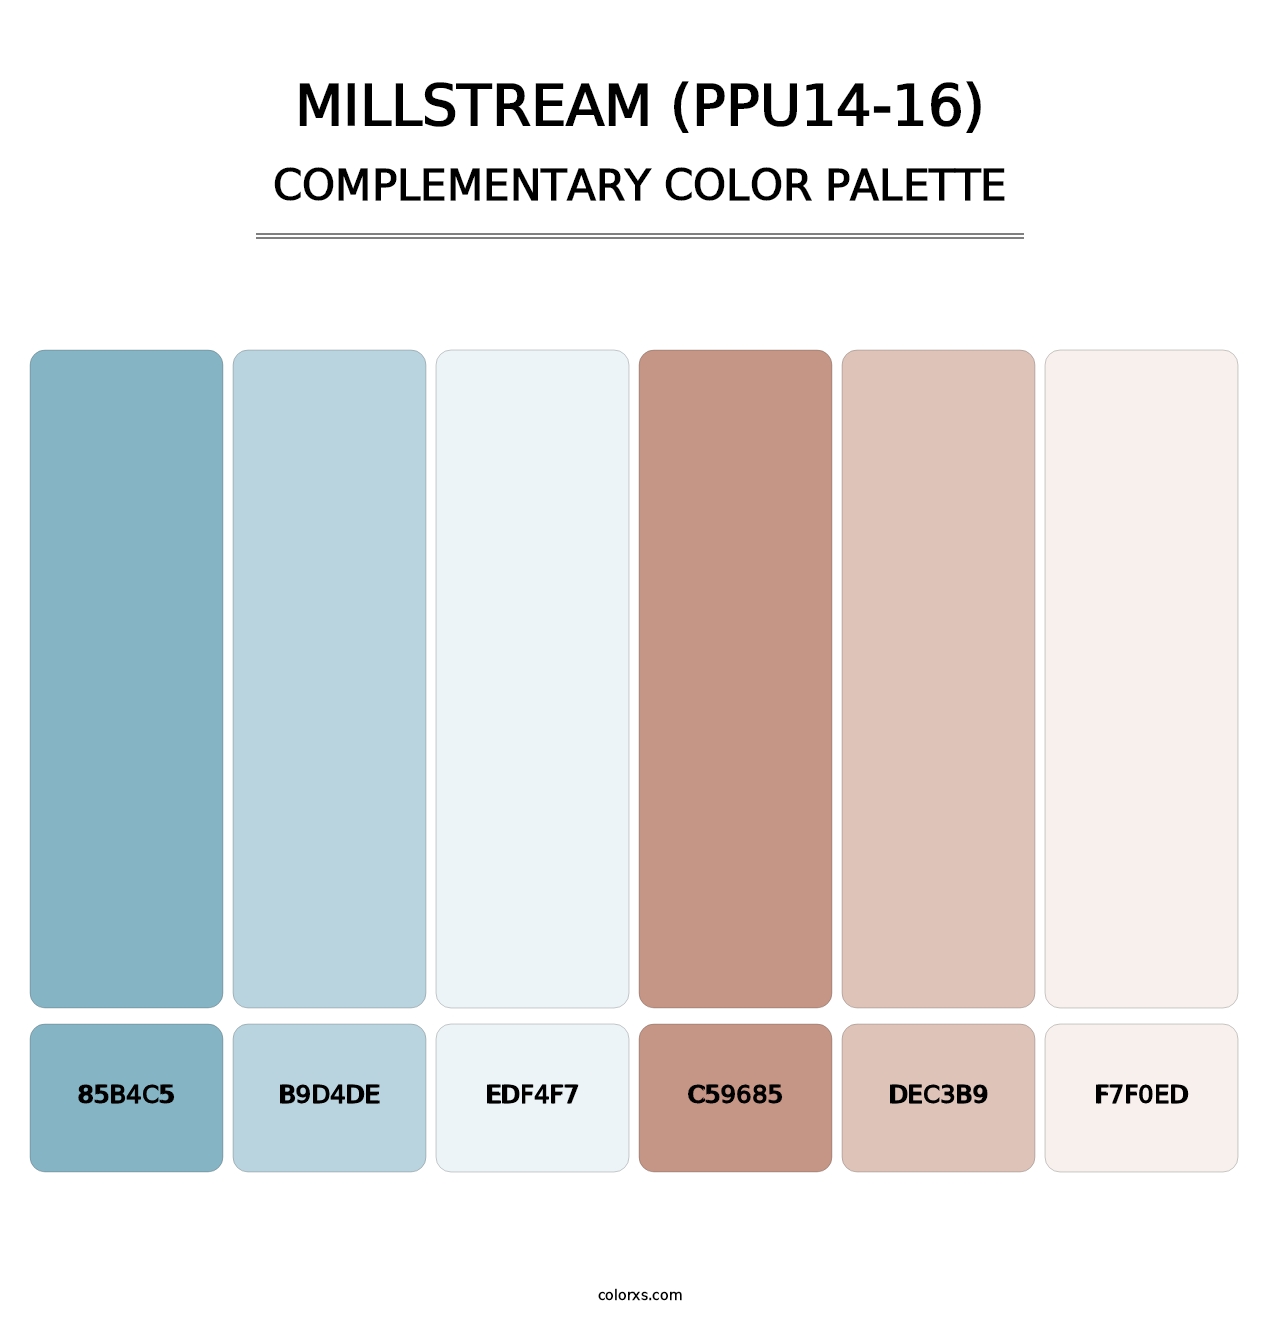 Millstream (PPU14-16) - Complementary Color Palette